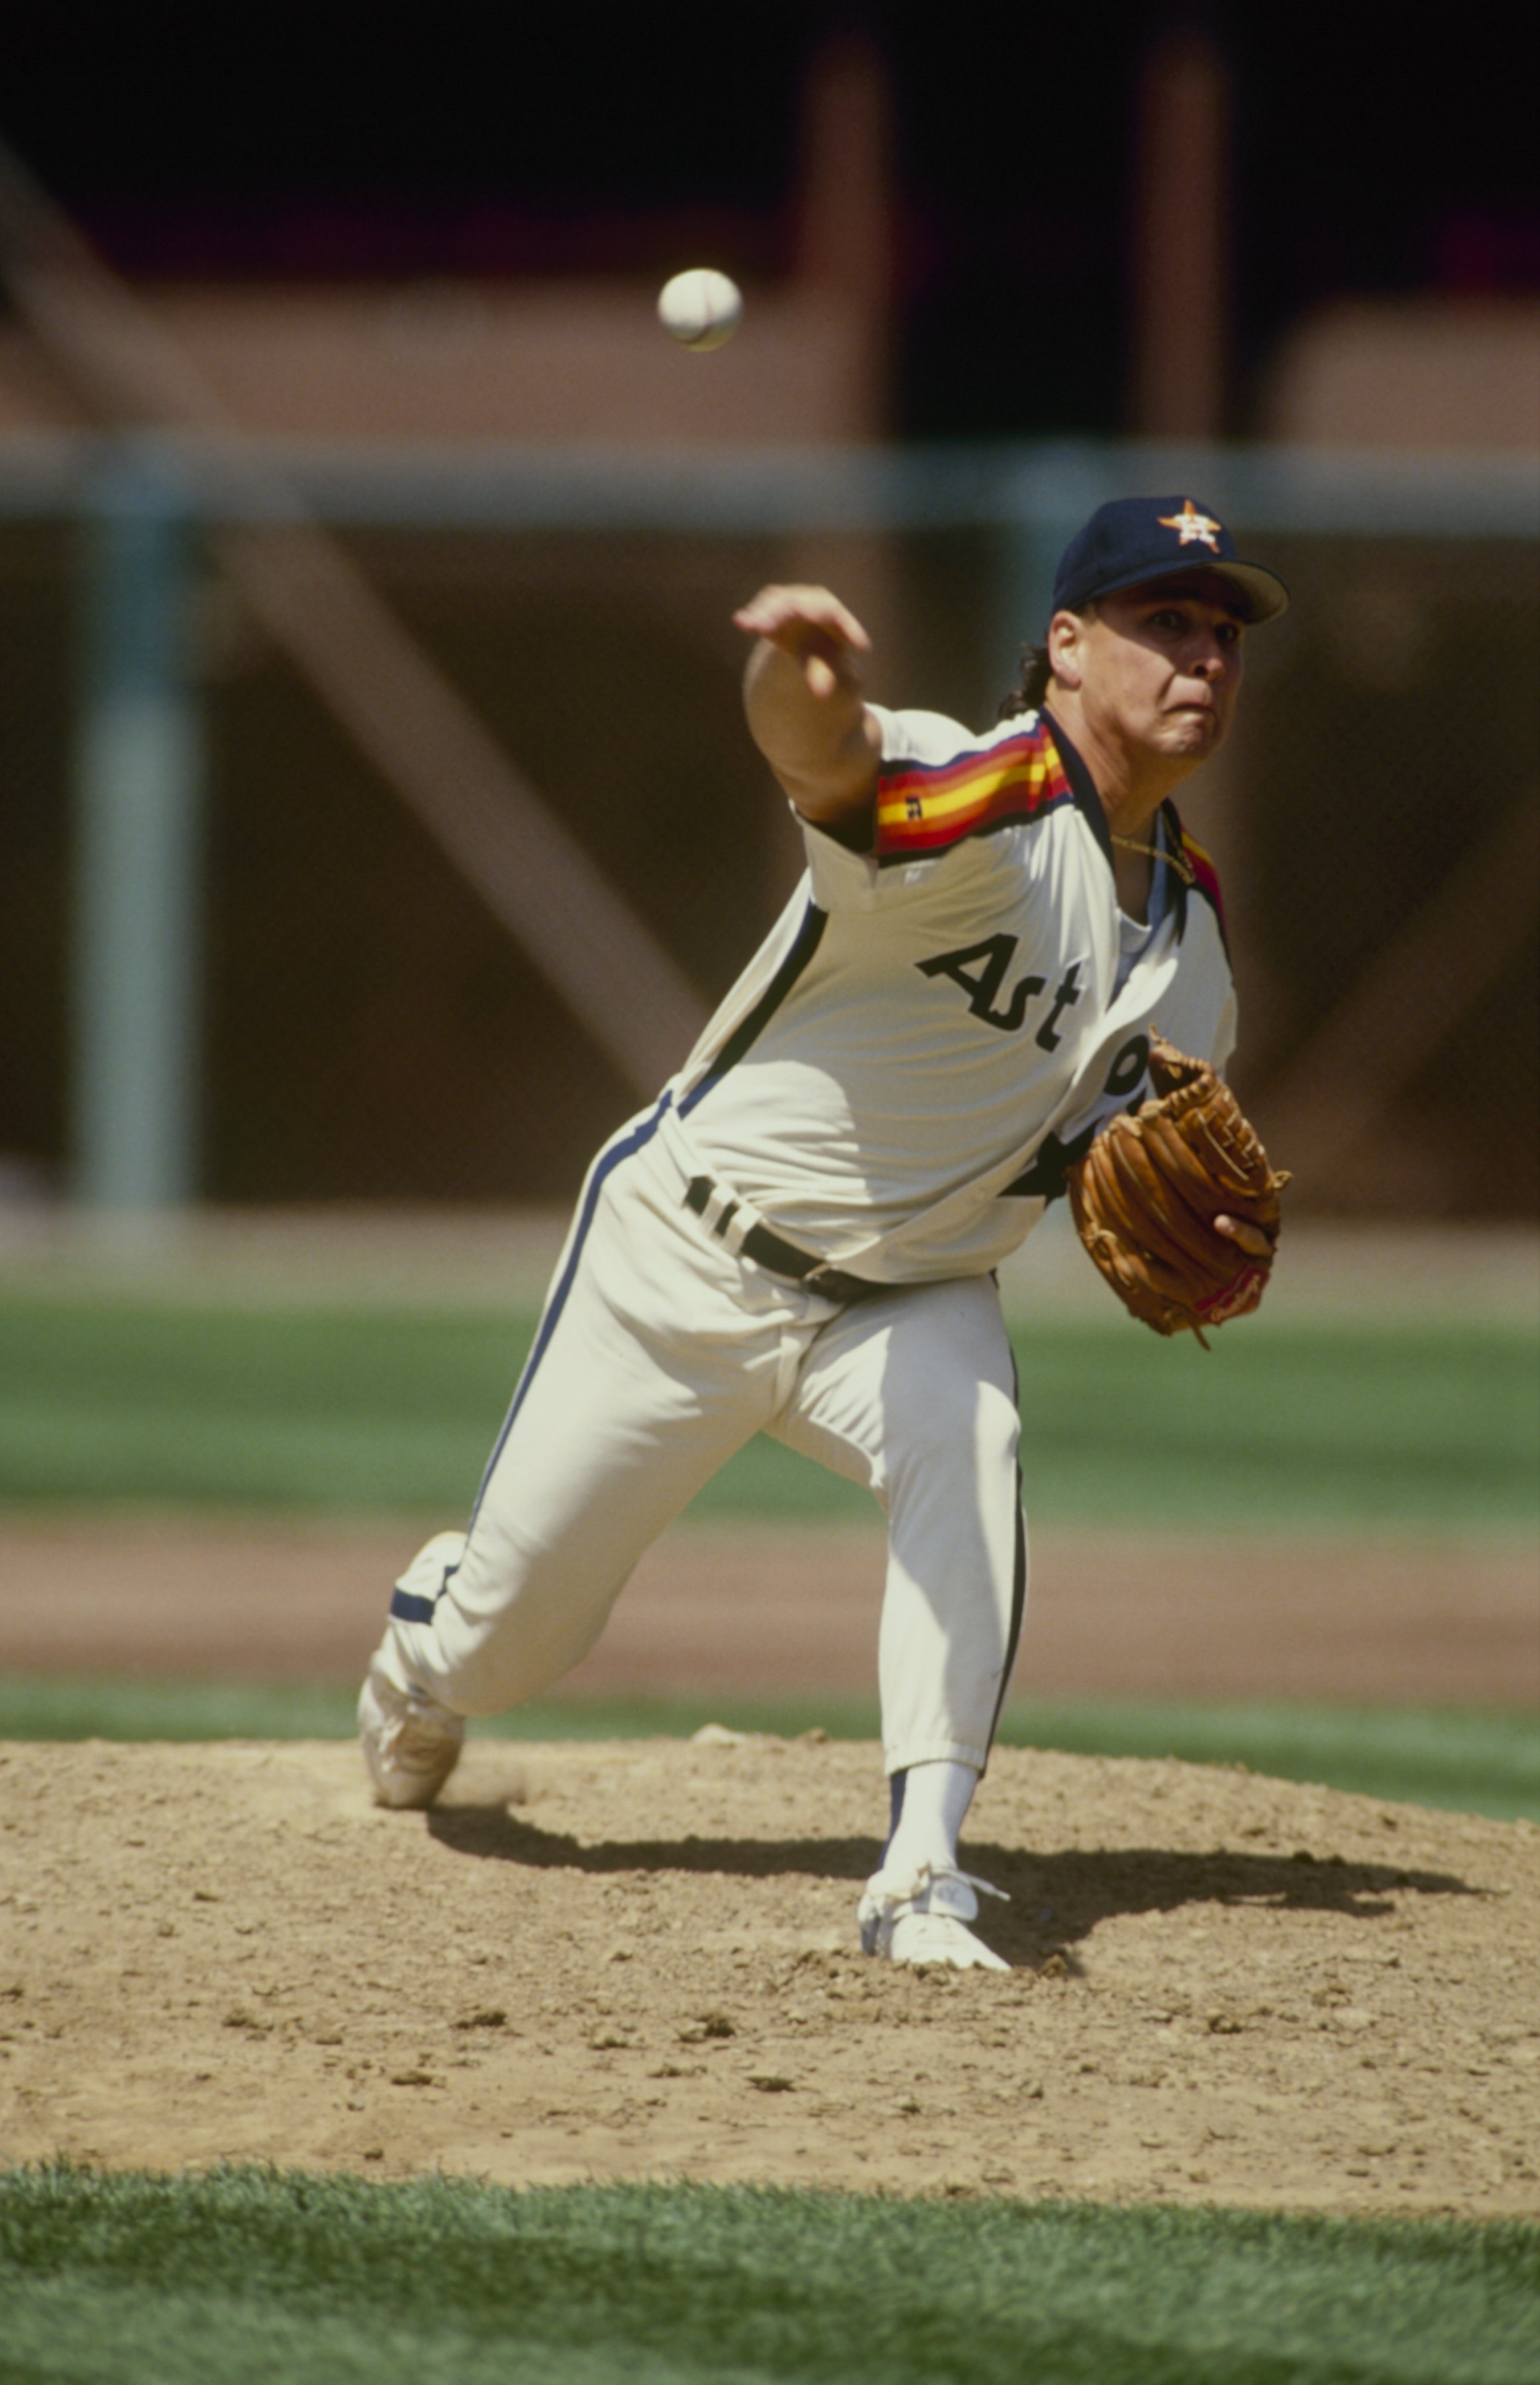 Big Days in Astros History - September 9, 1989 - Mike Scott wins 100th game  as Astro